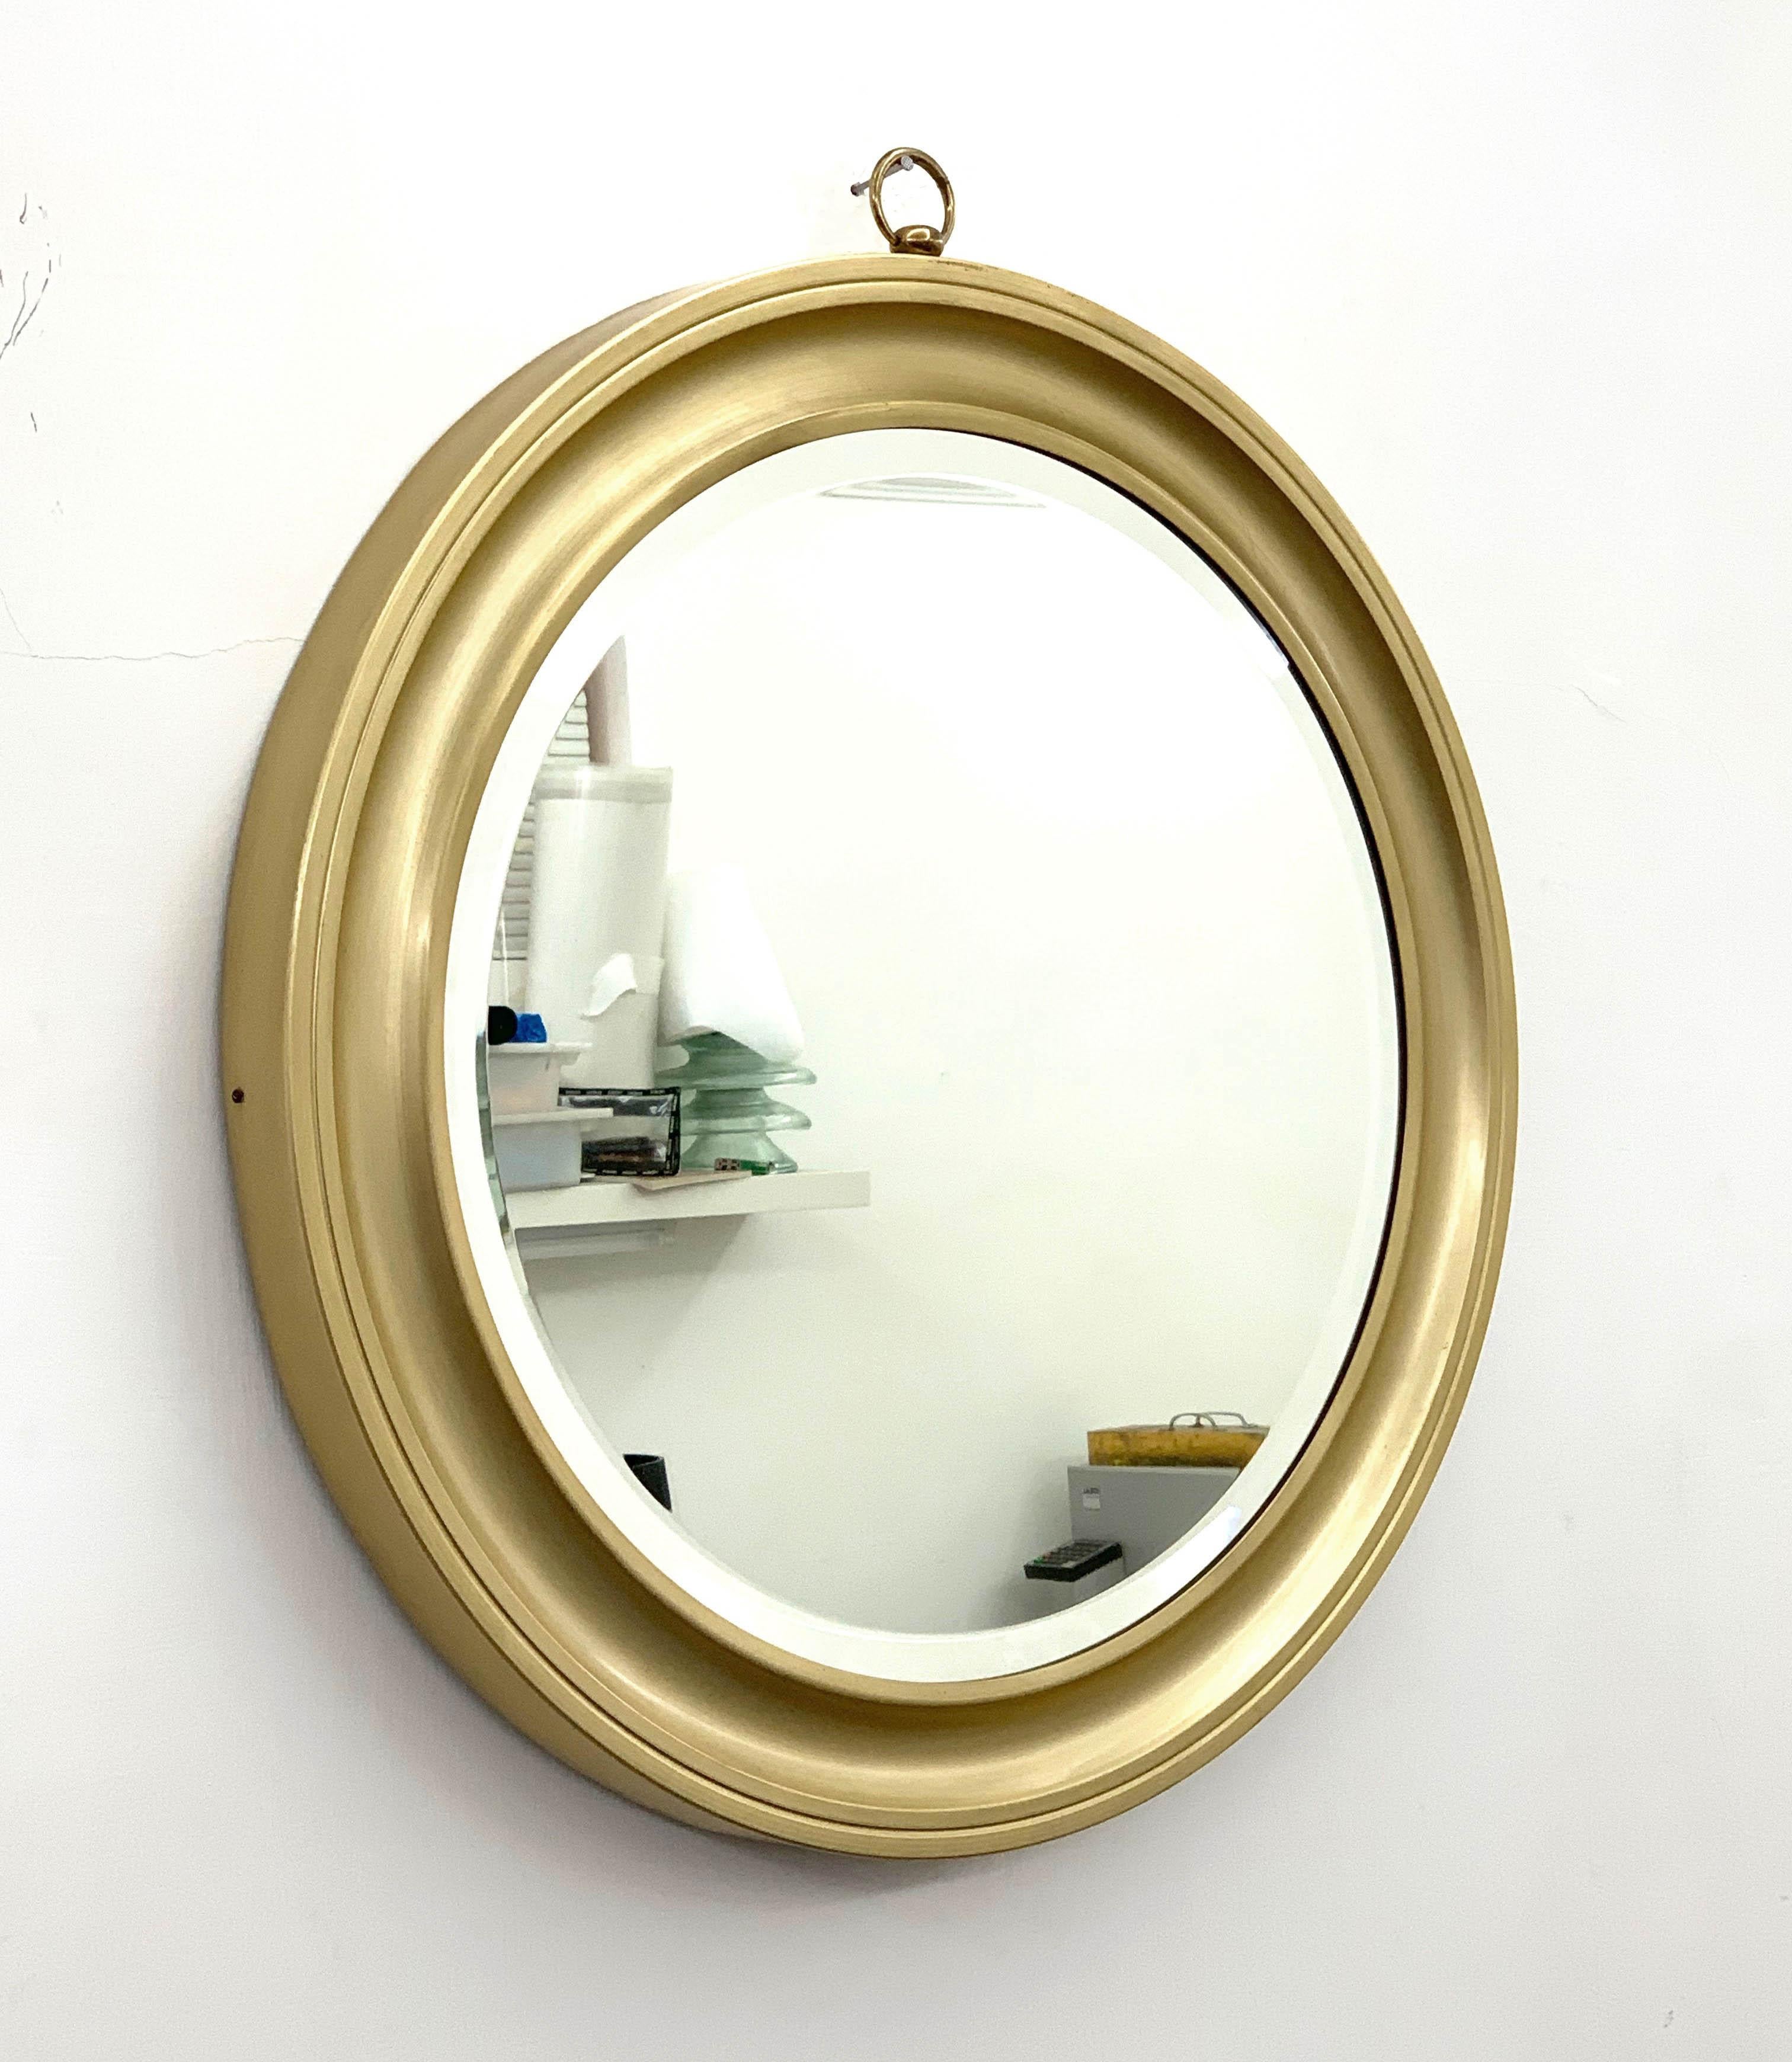 Rare and magnificent modernist mirror in gilded aluminum. The item was produced in Italy during the 1960s.

Amazing wall mirror attributed to Sergio Mazza for Artemide.

This original mirror has a concave centre that creates depth and texture in